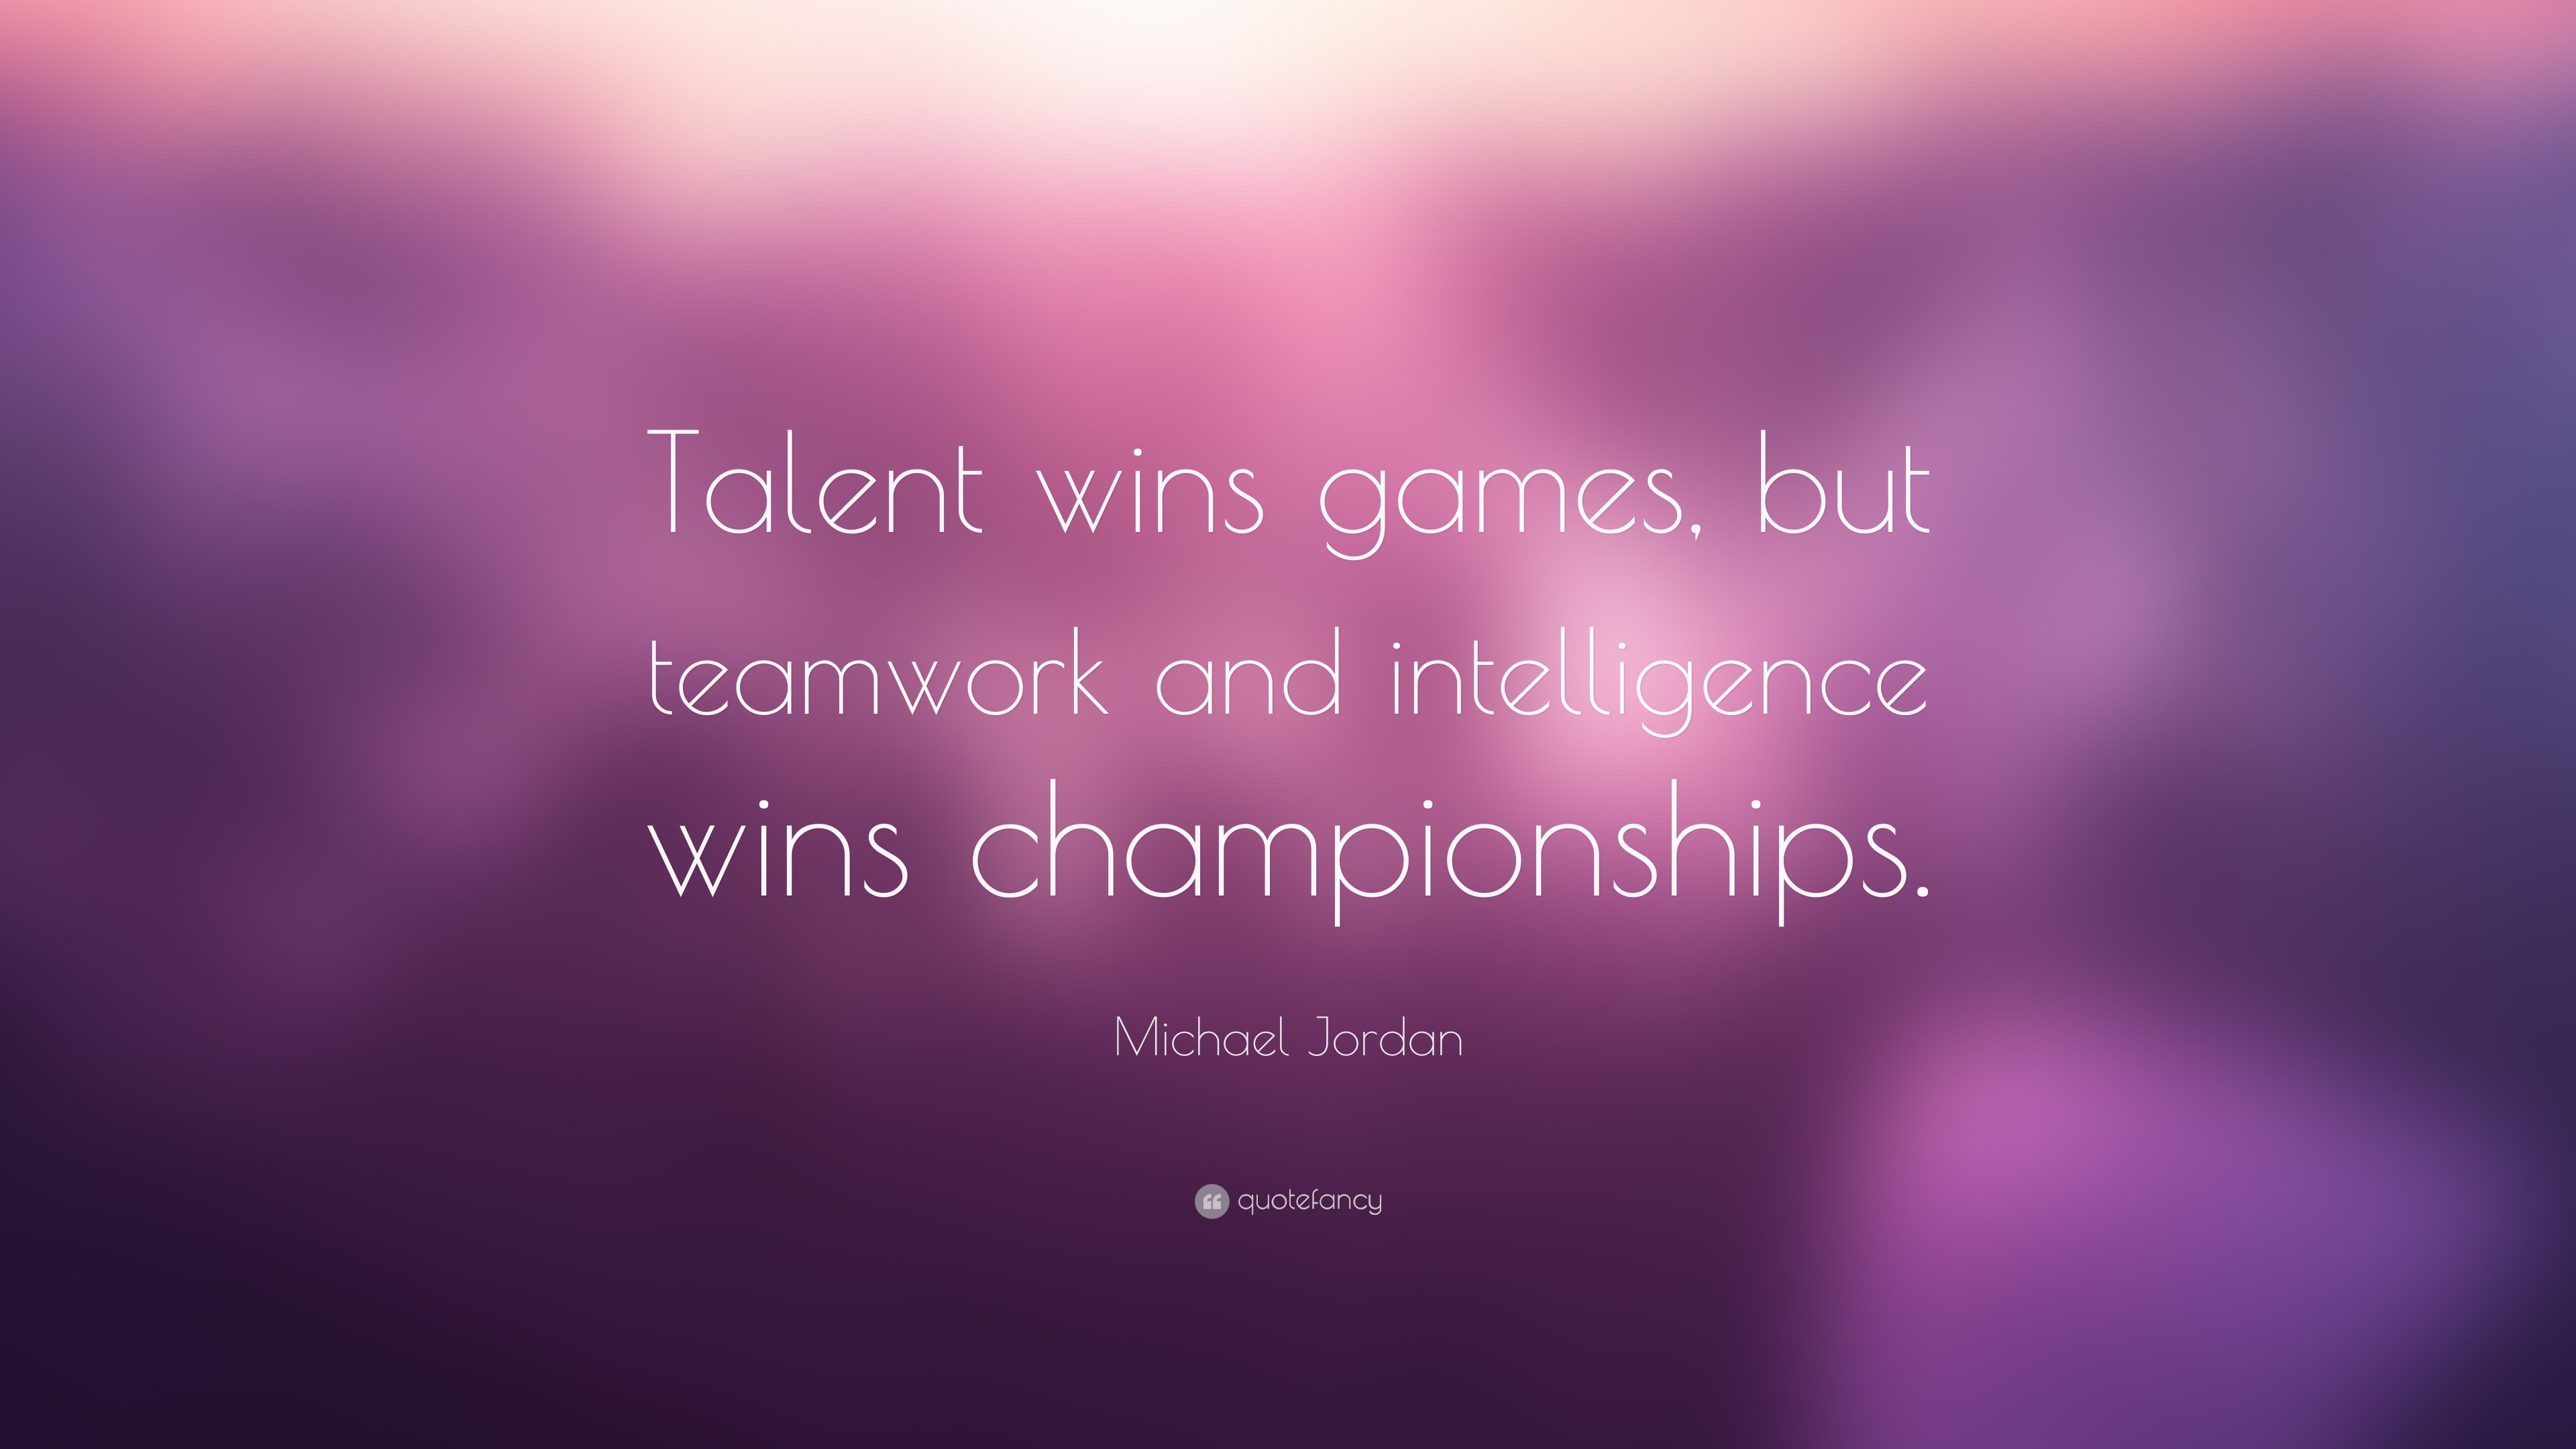 Michael Jordan Quote: “Talent wins games, but teamwork and intelligence